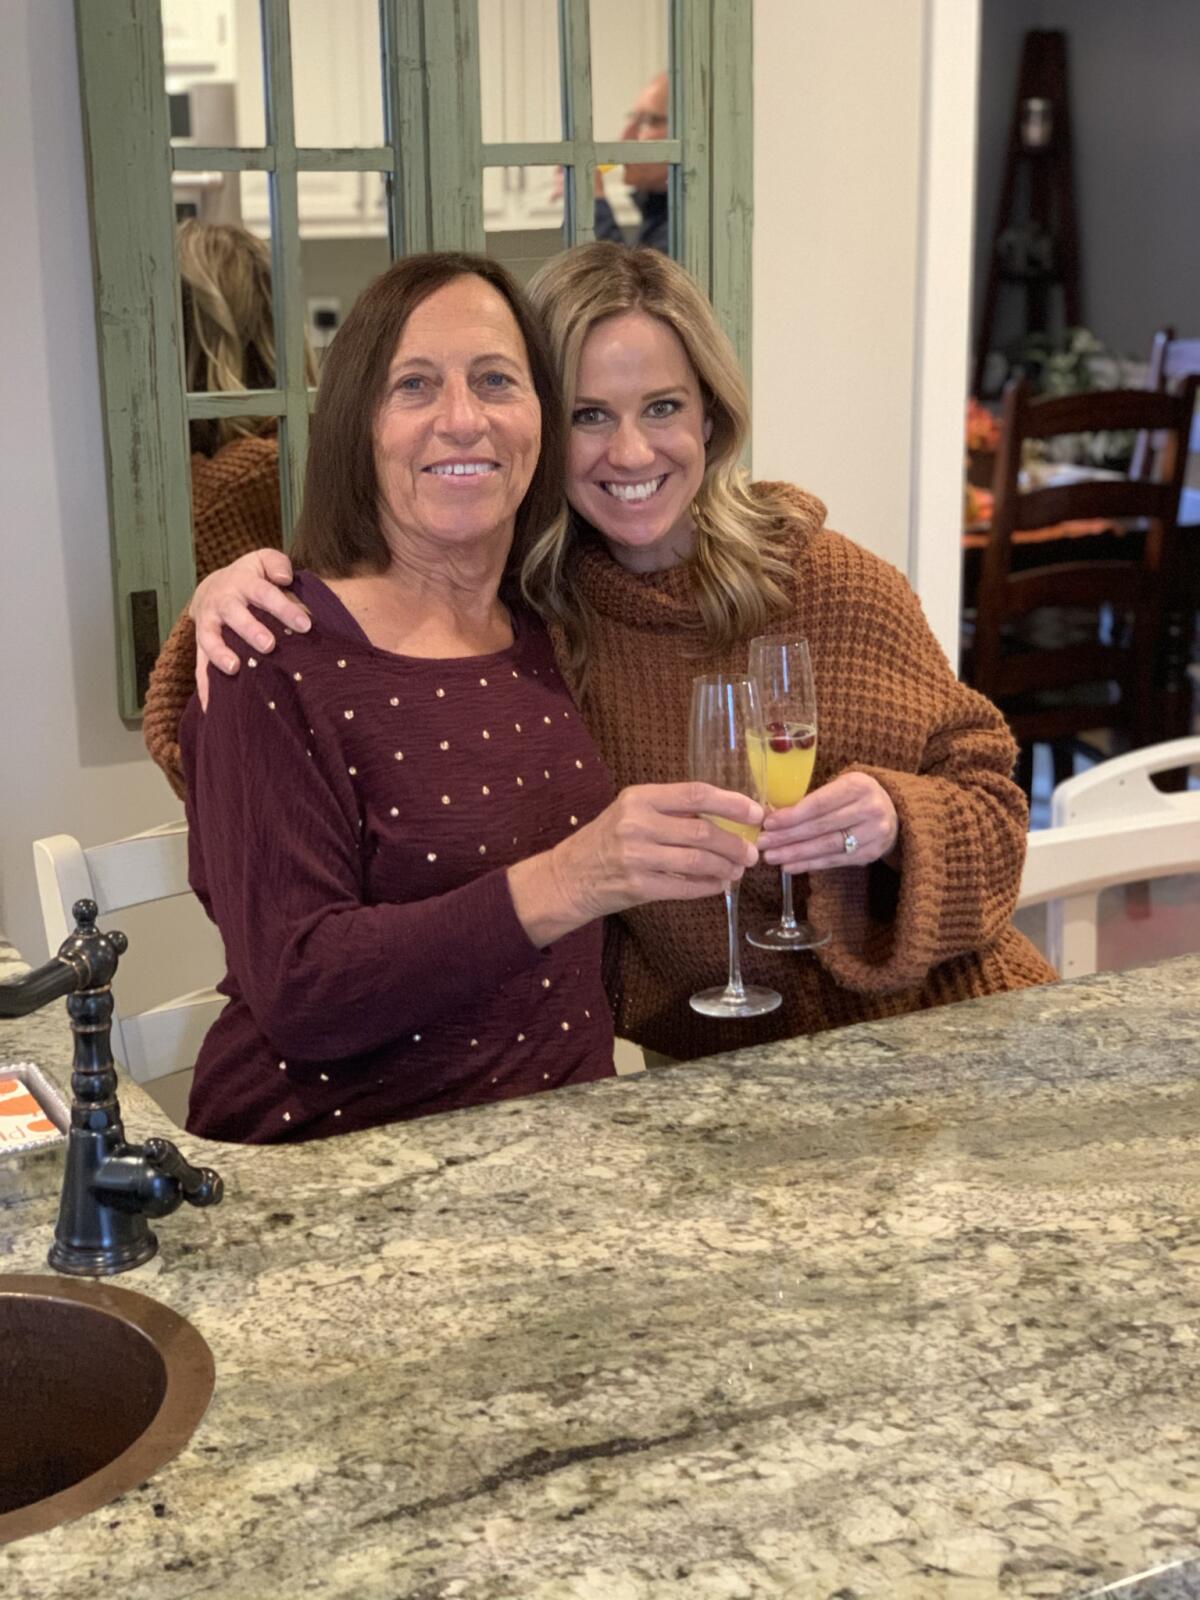 A woman and her adult daughter celebrate with champagne glasses.